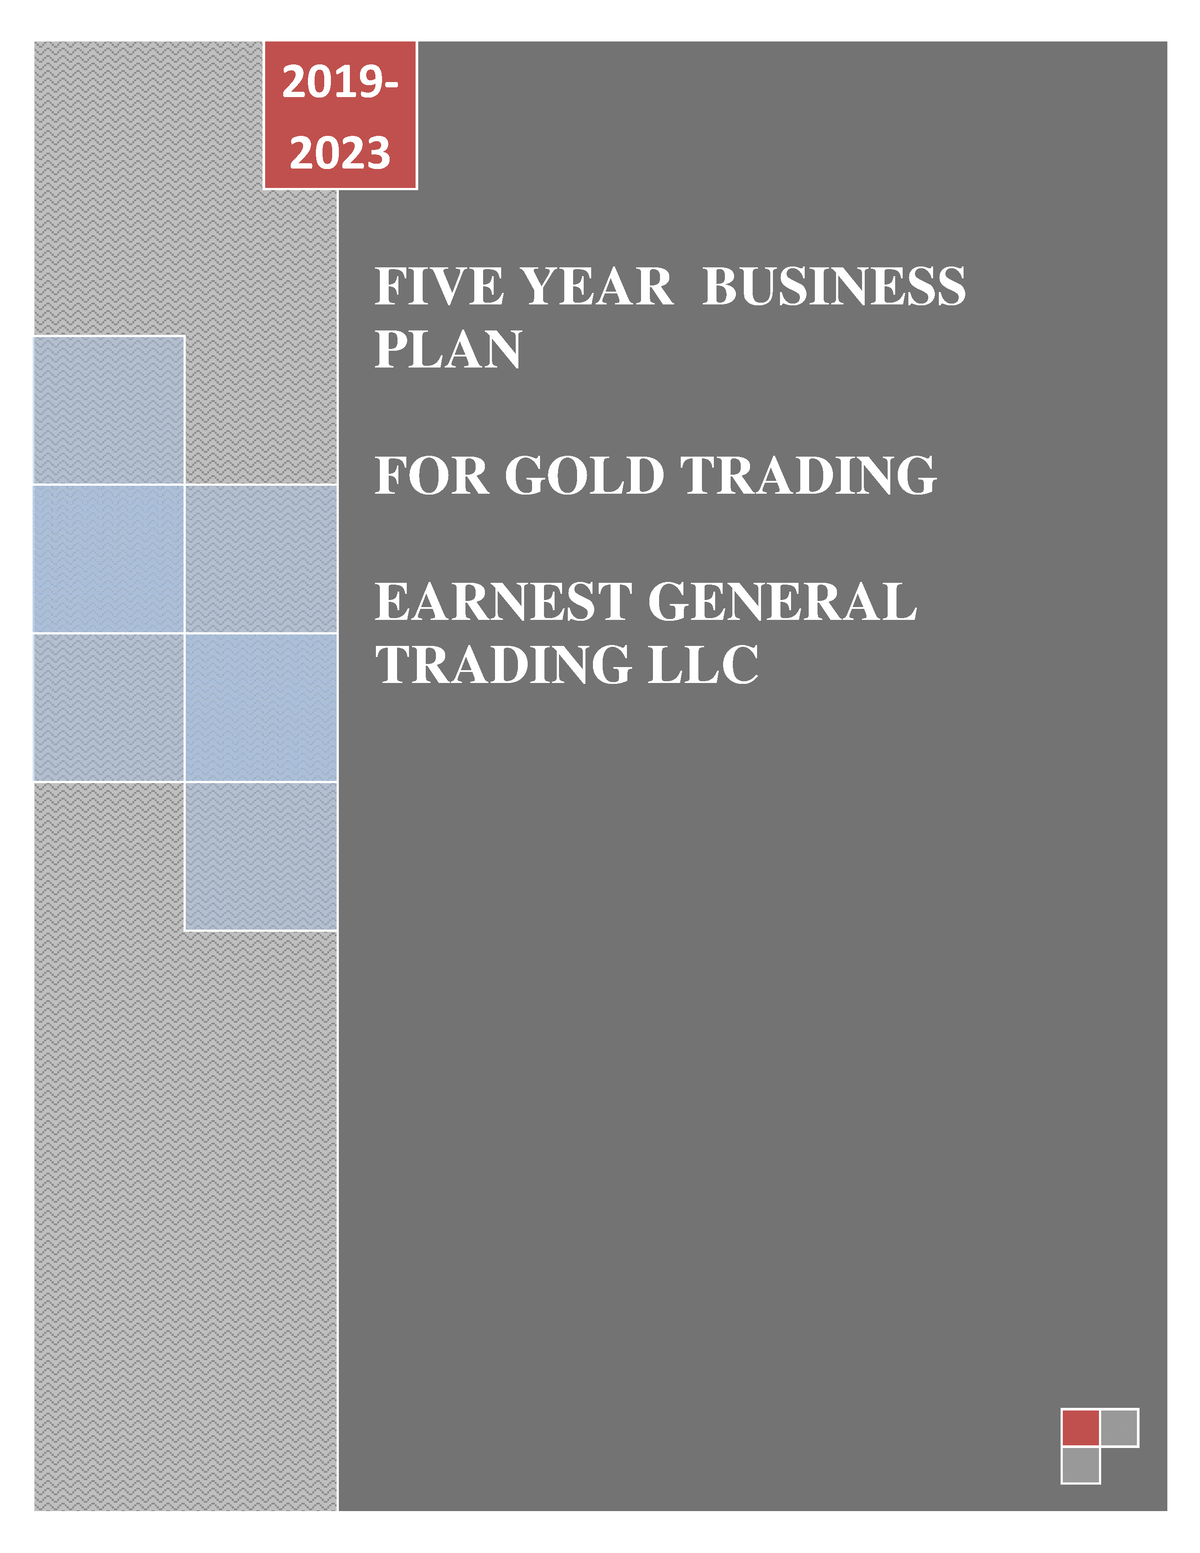 sample business plan for gold trading company